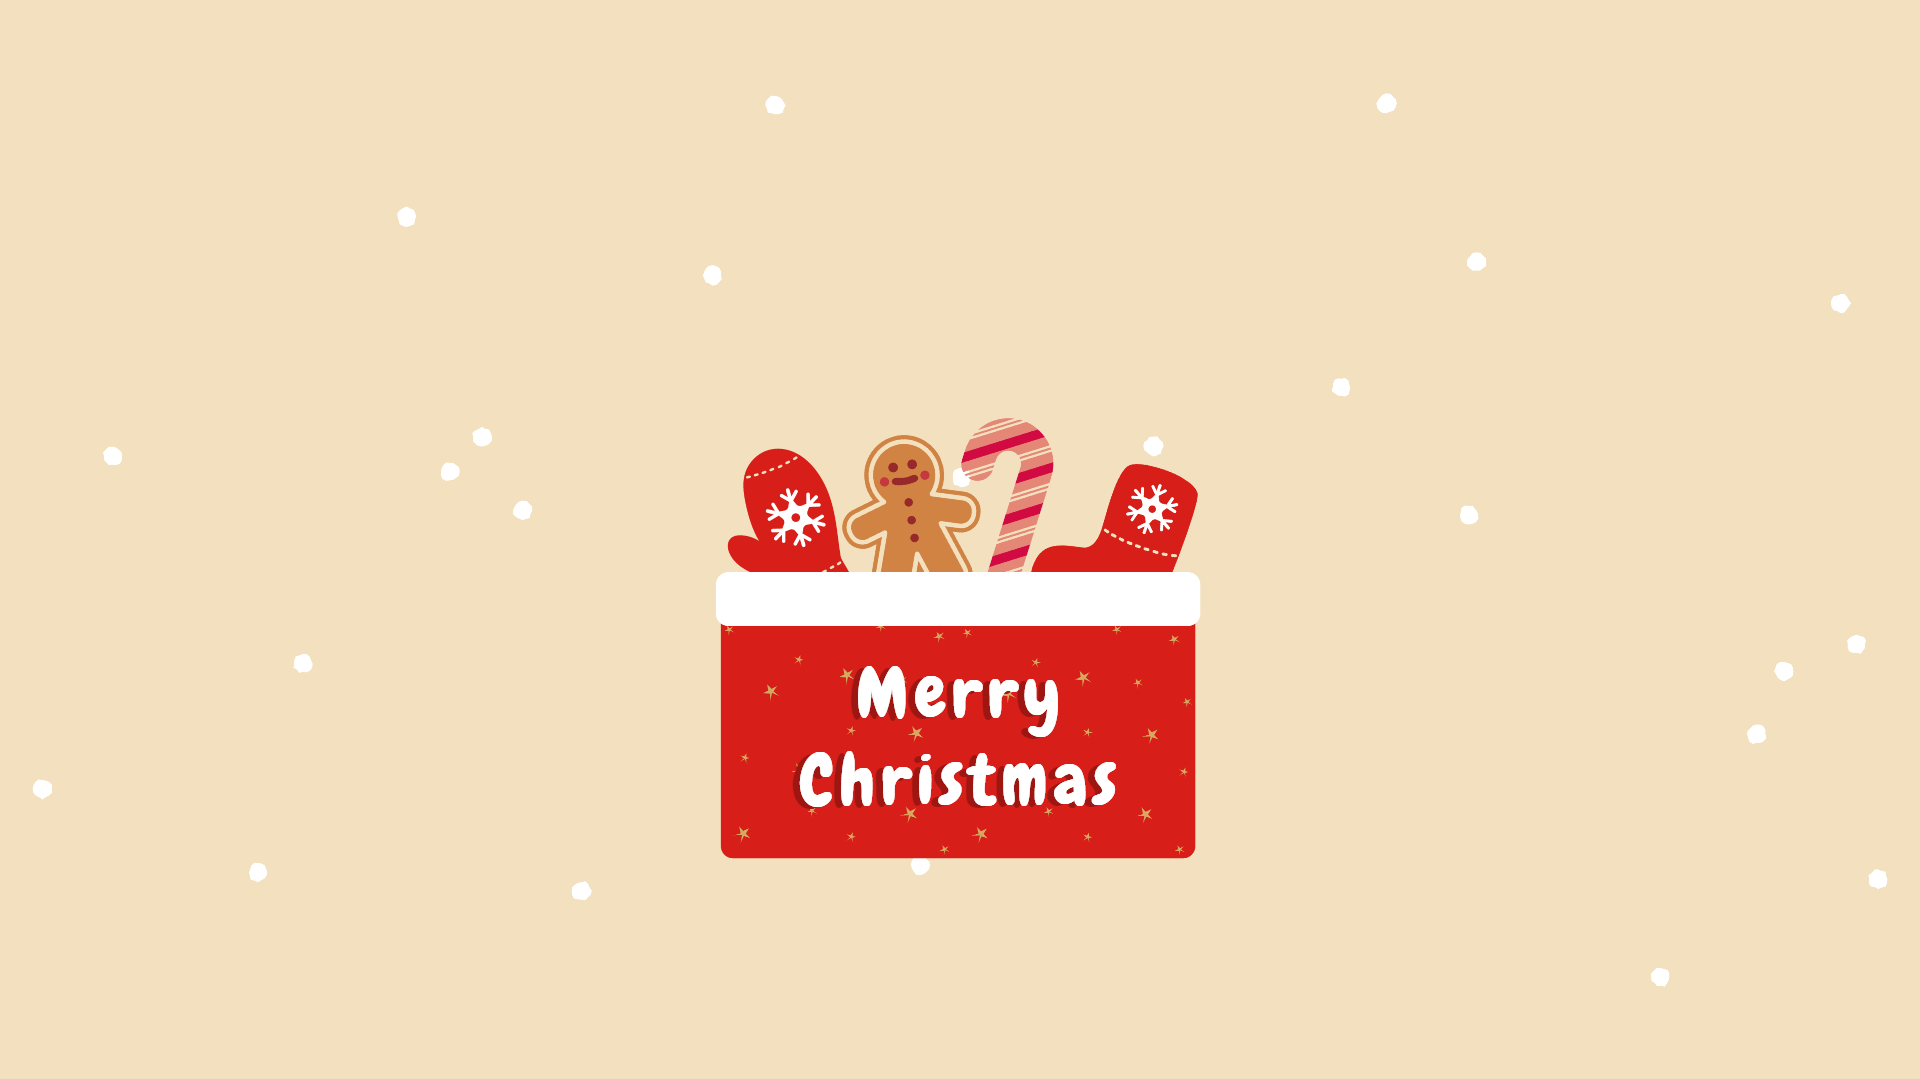 Christmas Wallpaper Background For Your Holiday